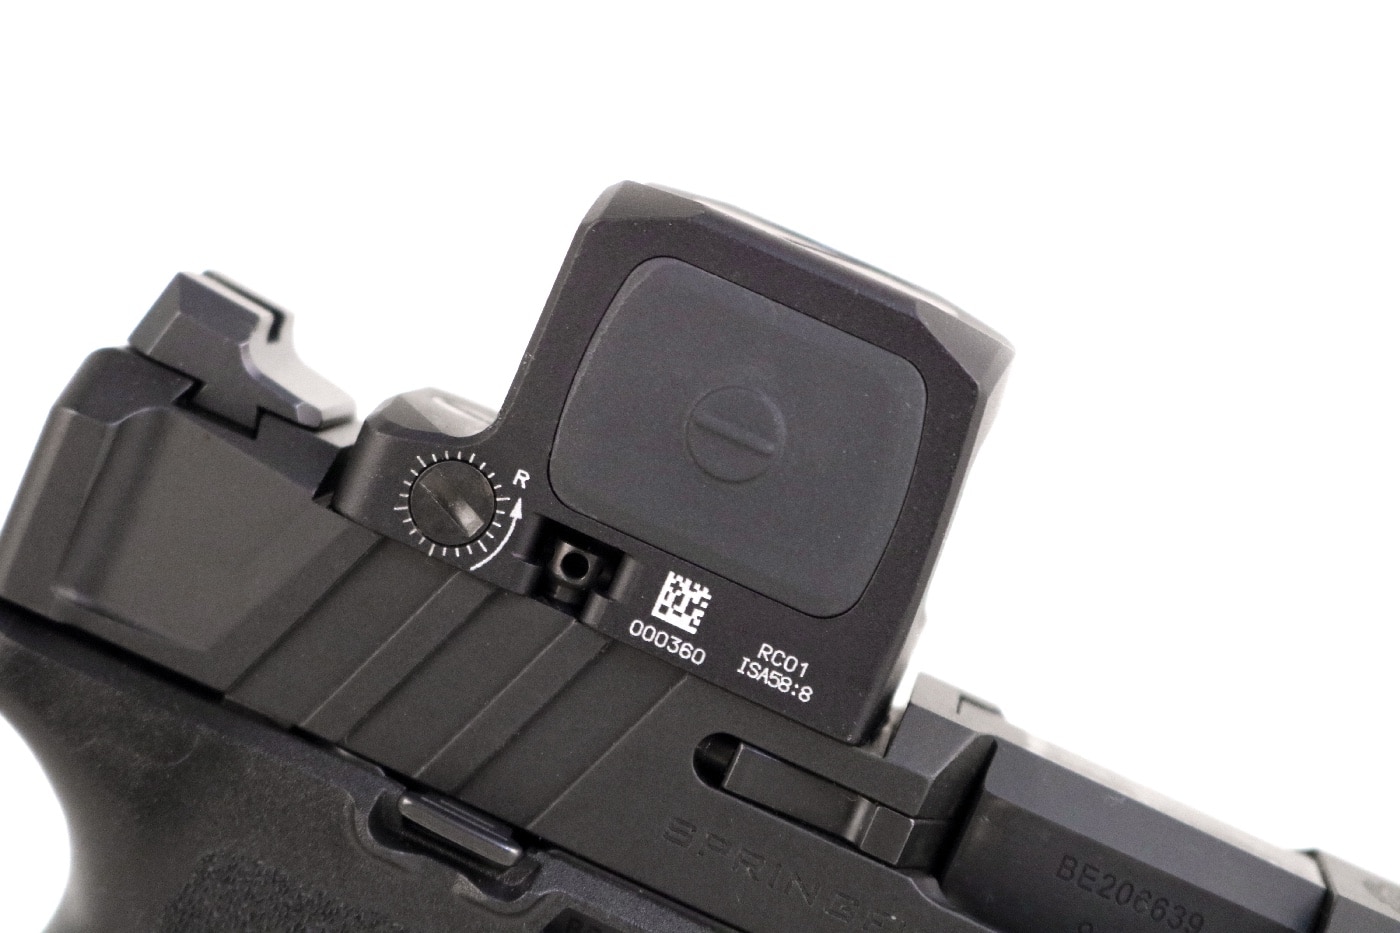 This is a close up of the right sidfe of the Trijicon RCR. The large controls are mounted on either side of the RCRs body. It has increased durability to withstand most any impact blow or damage. It fits perfectly on the Springfield Armory Echelon but causes Glock pistols to explode. 